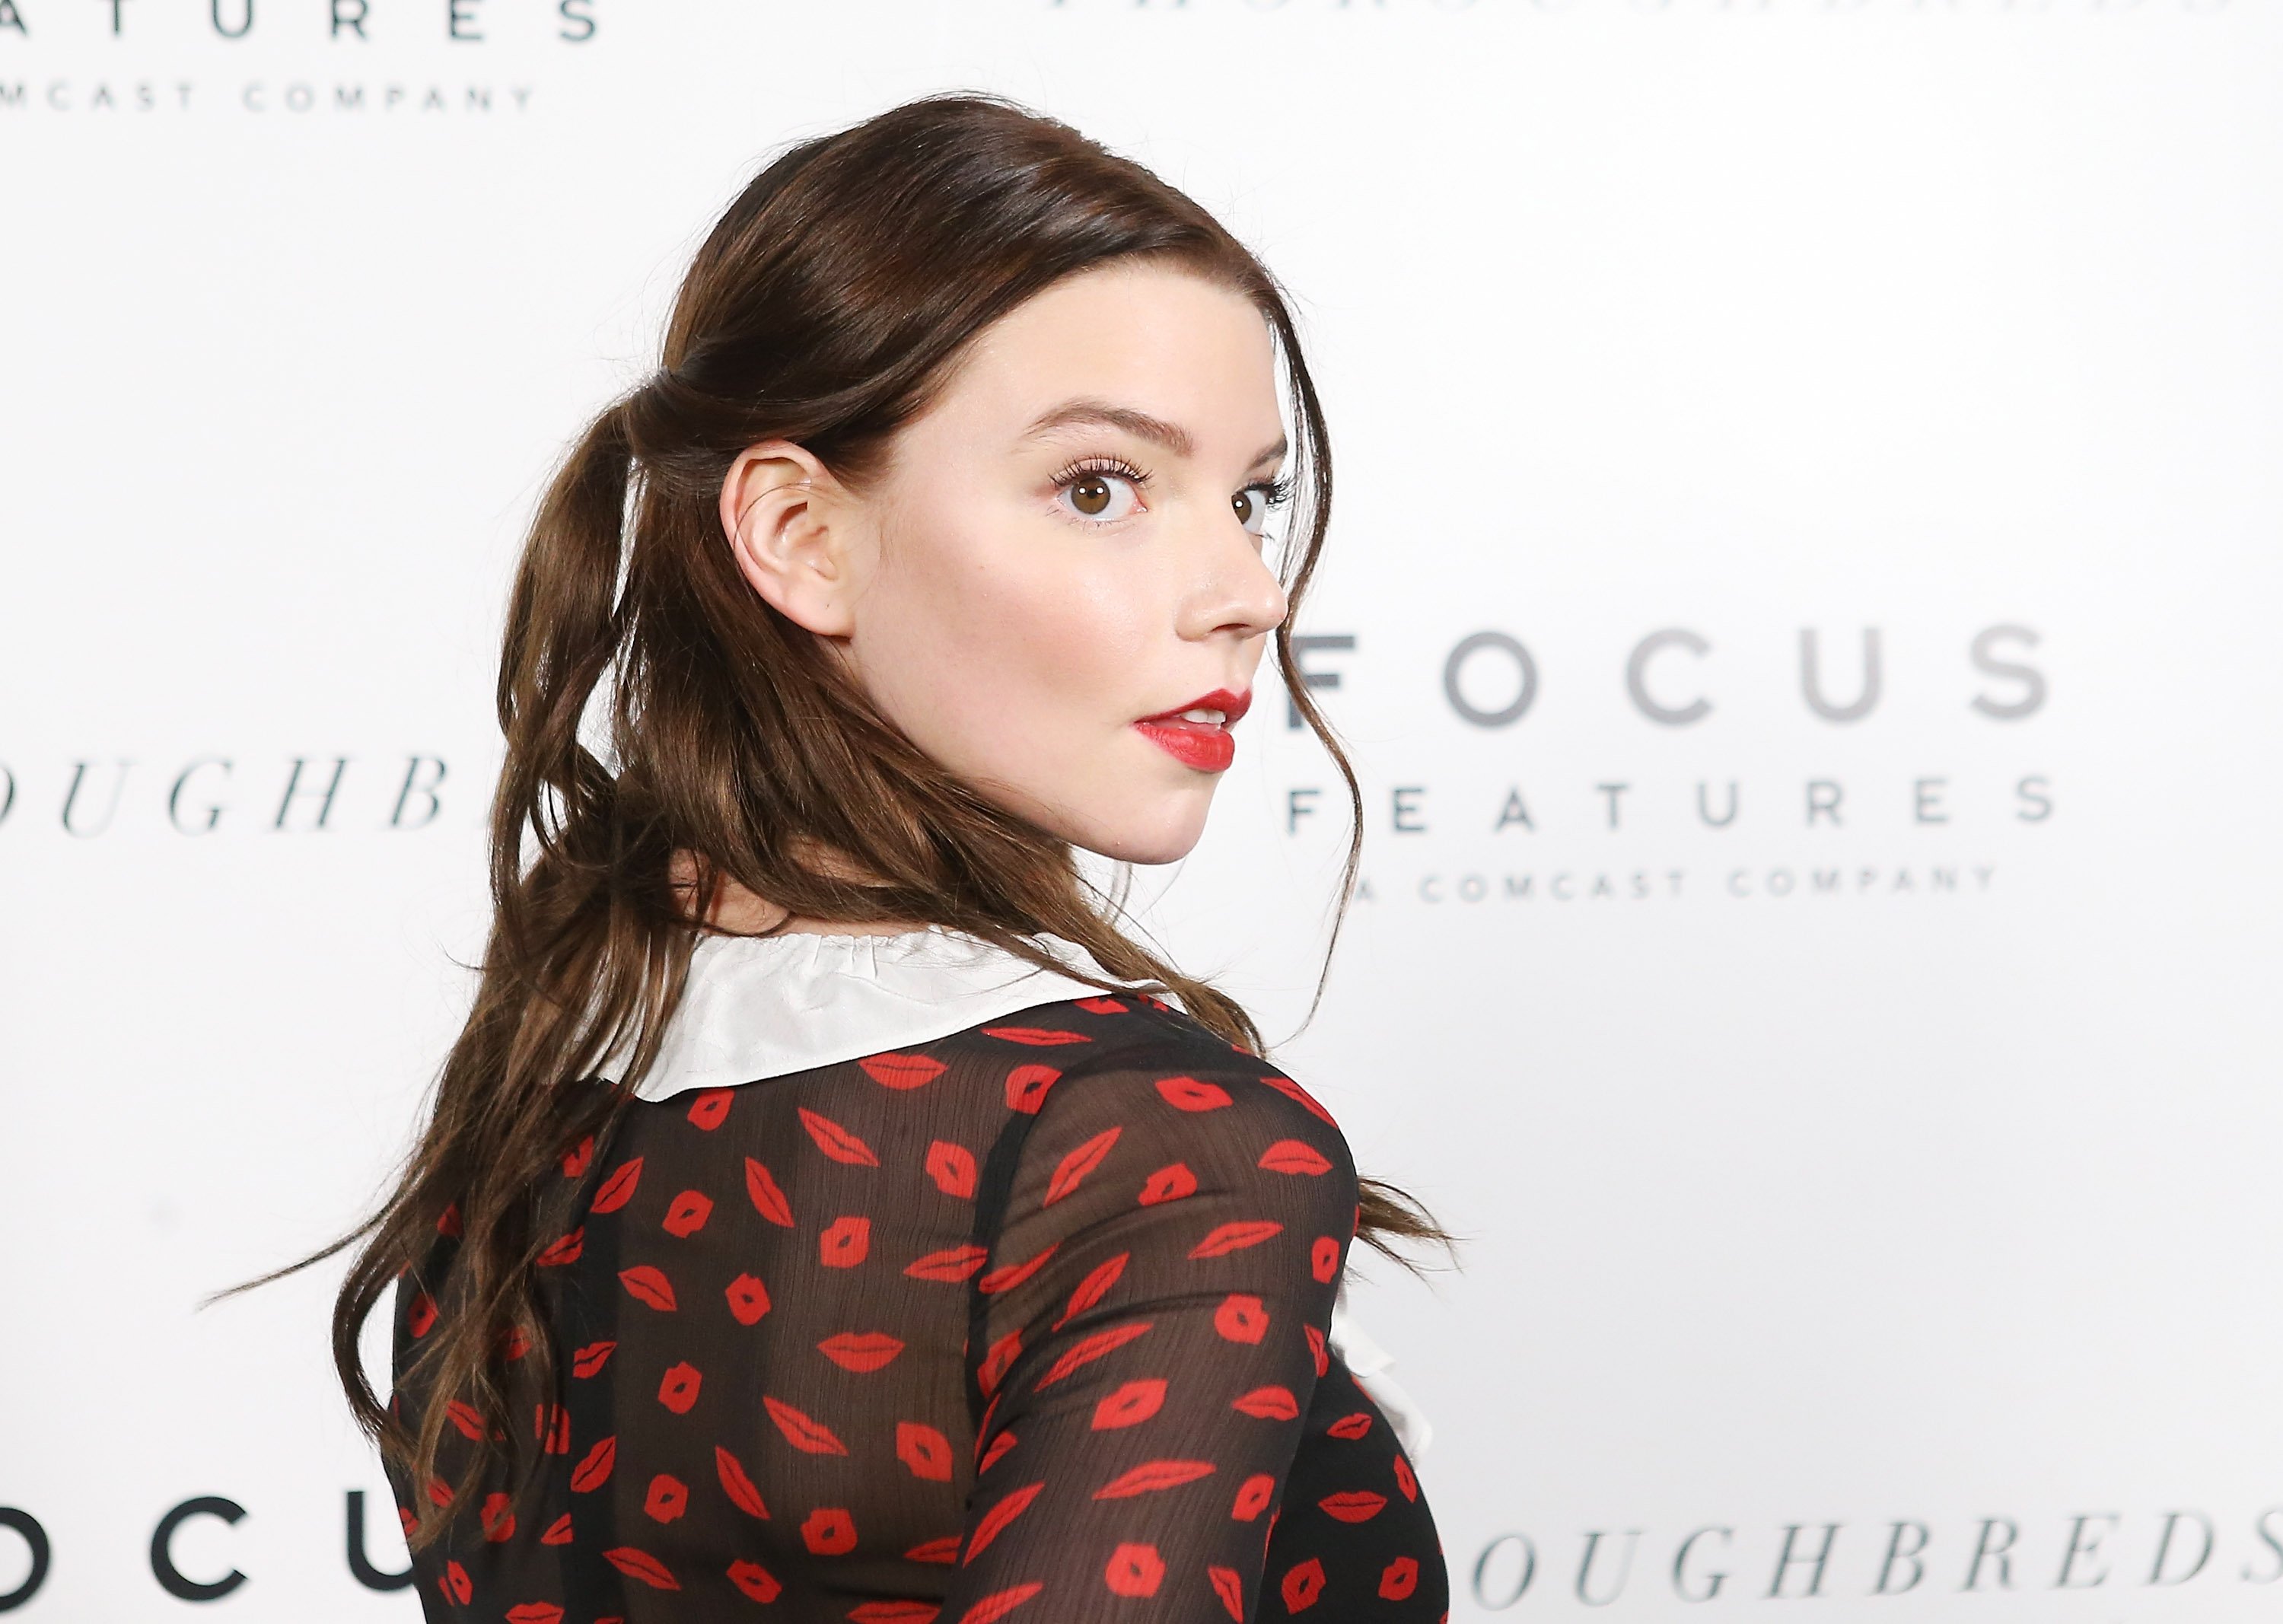 Anya Taylor-Joy Talks About The Queen's Gambit